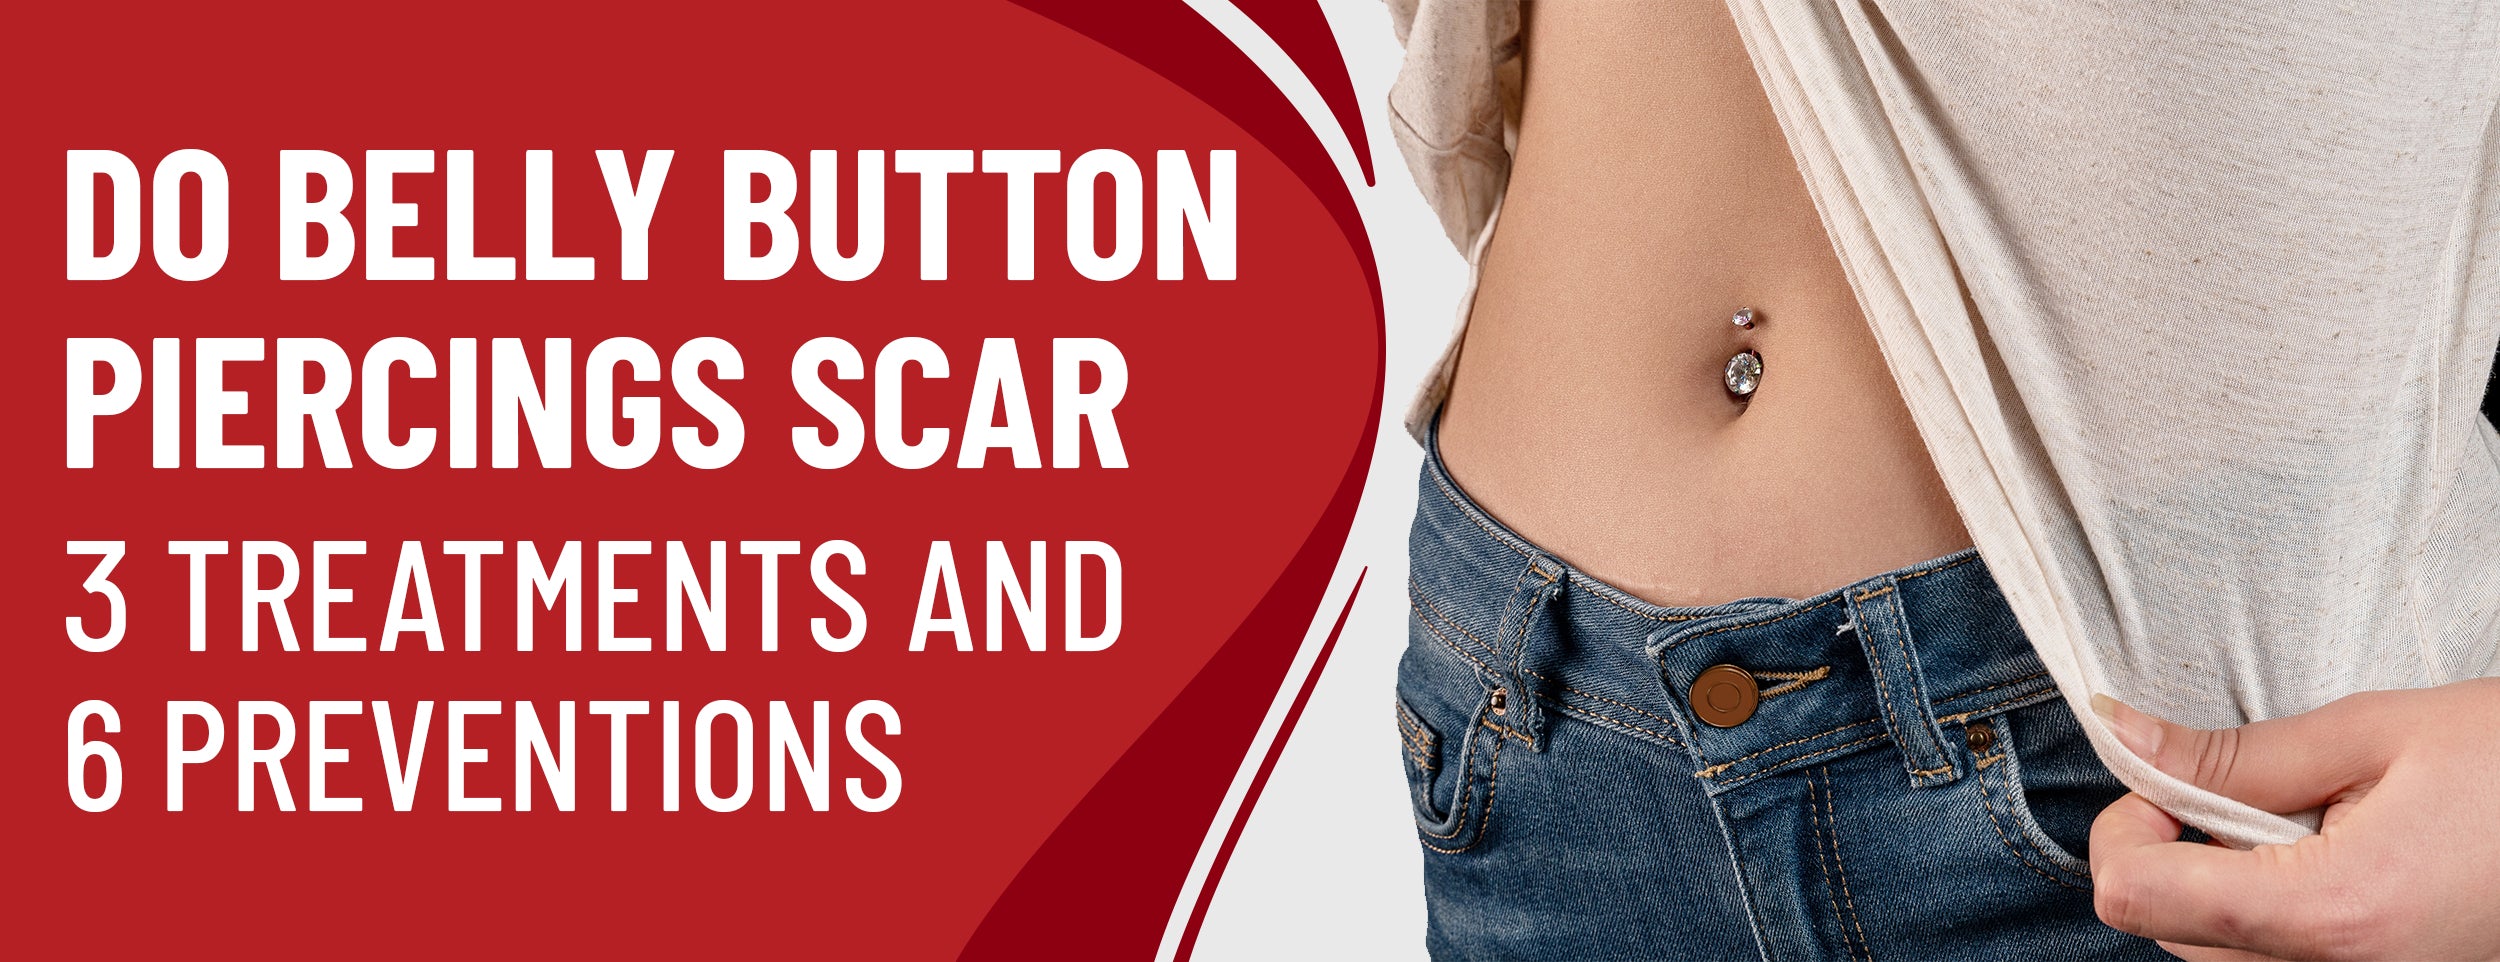 6 Tips to Prevent and Remove Scarring from Belly Button Piercings